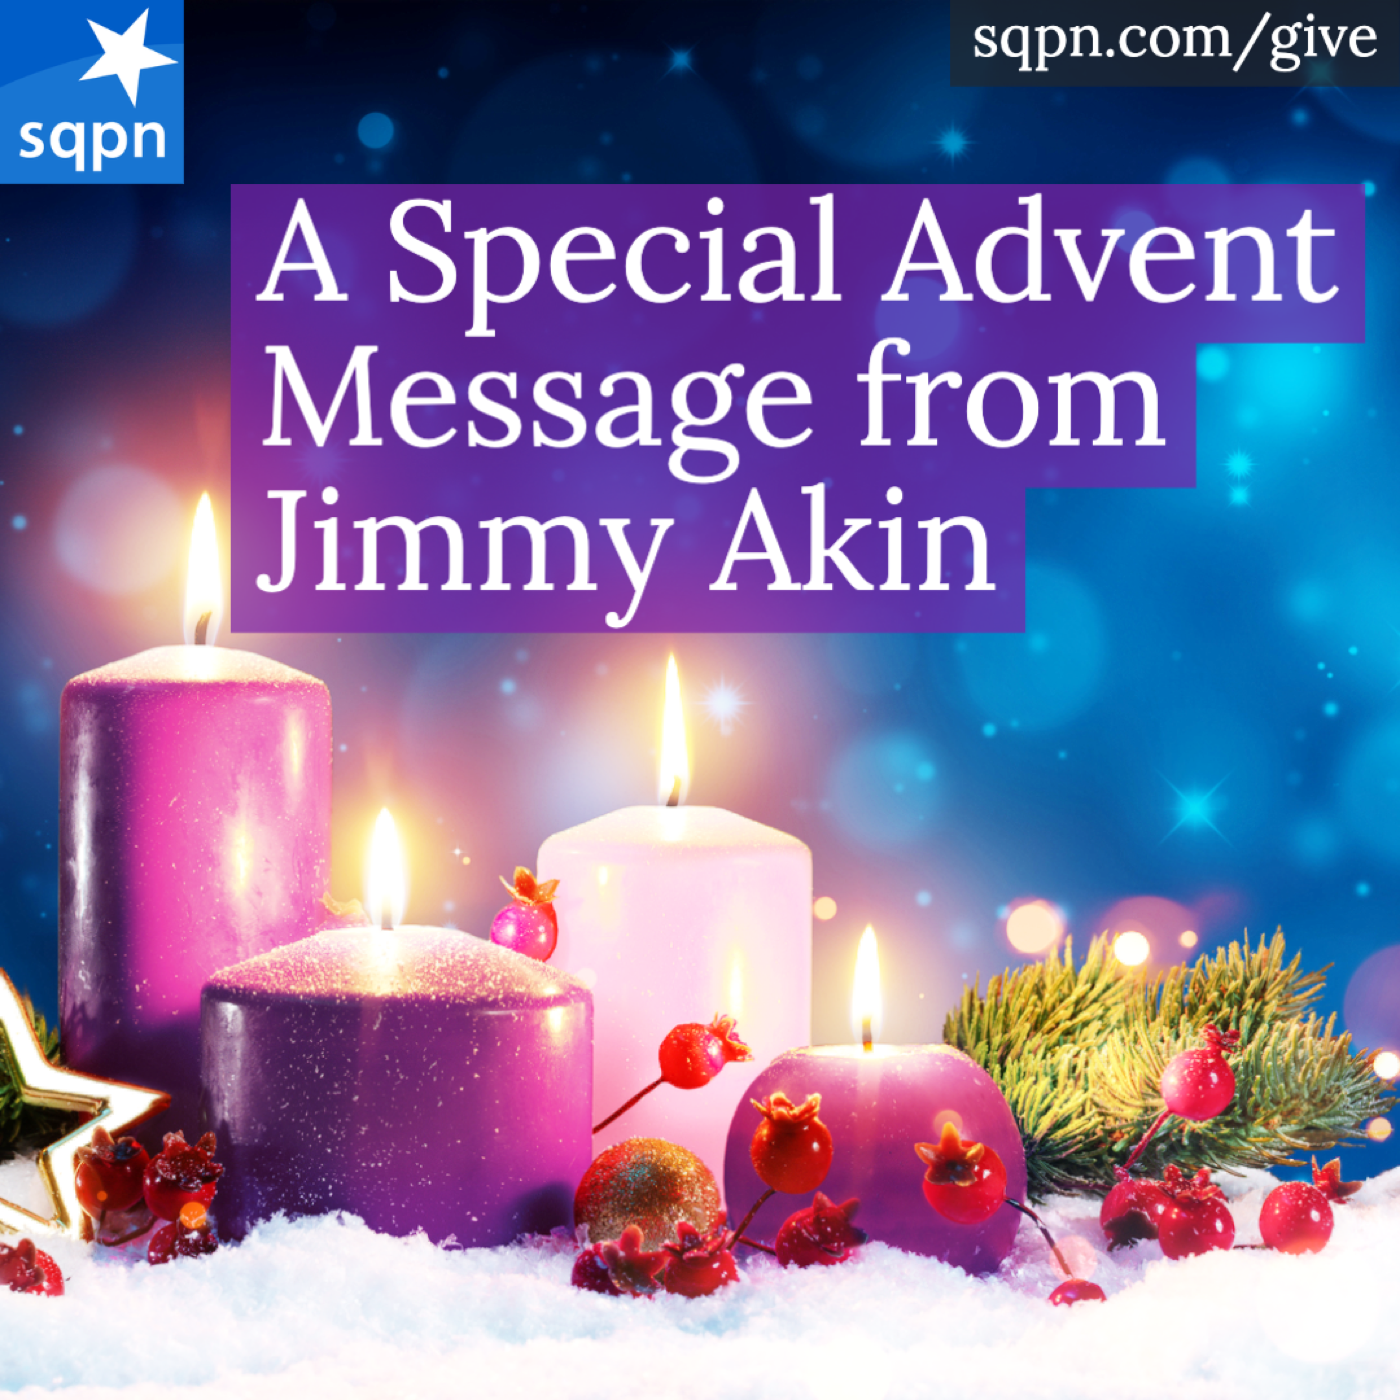 A Special Advent Message from Jimmy Akin